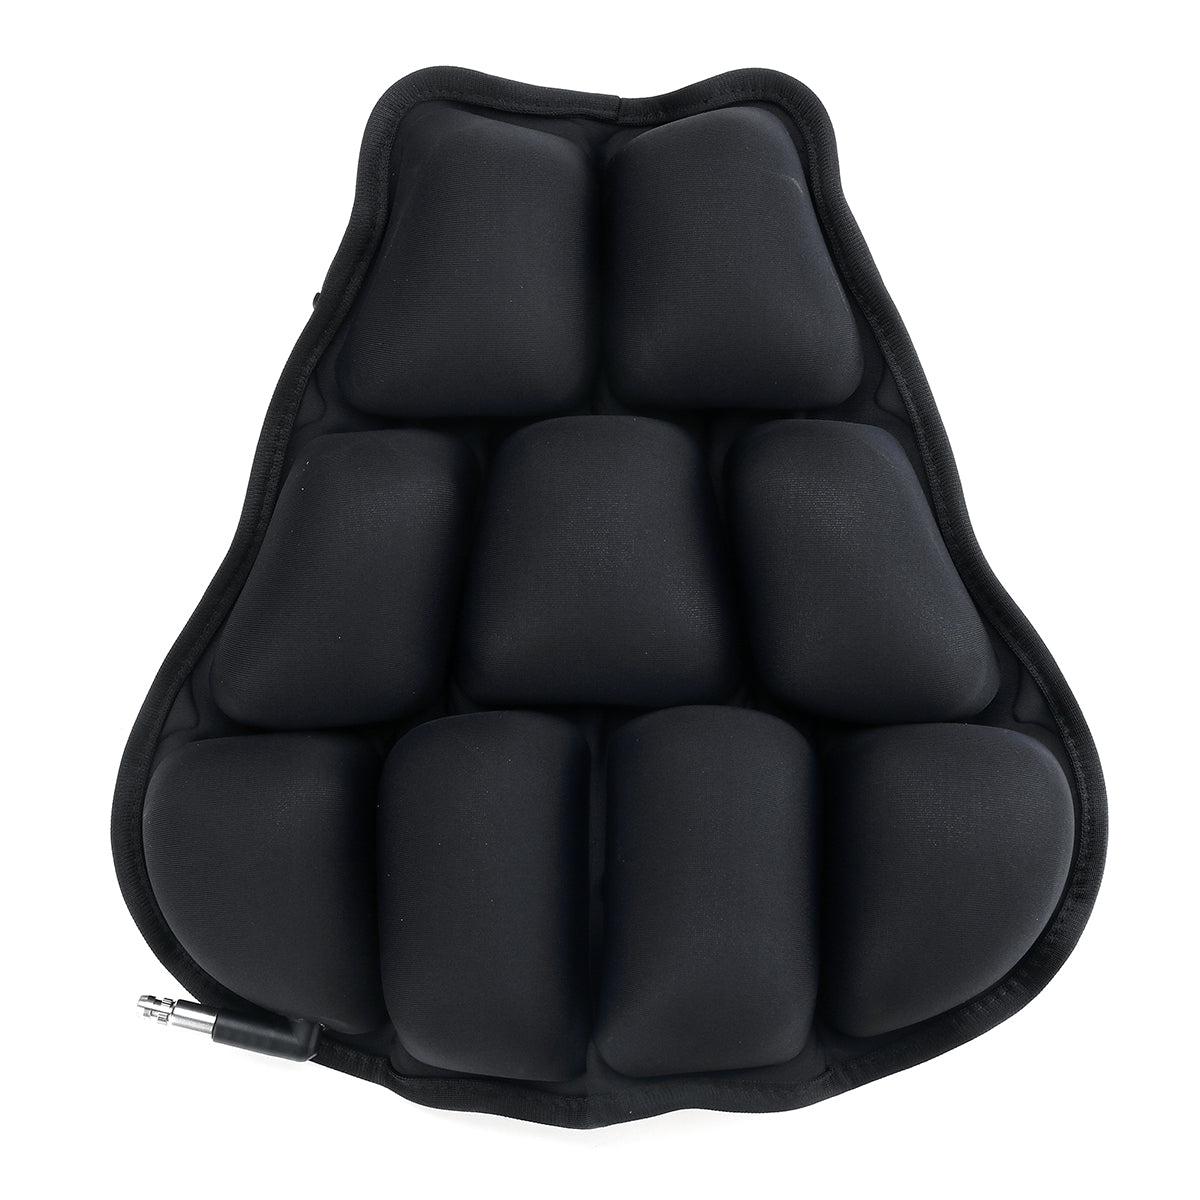 Dark Slate Gray 3D Inflatable Air Seat Cushion Motorcycle Cruiser Touring Saddle Pressure Relief